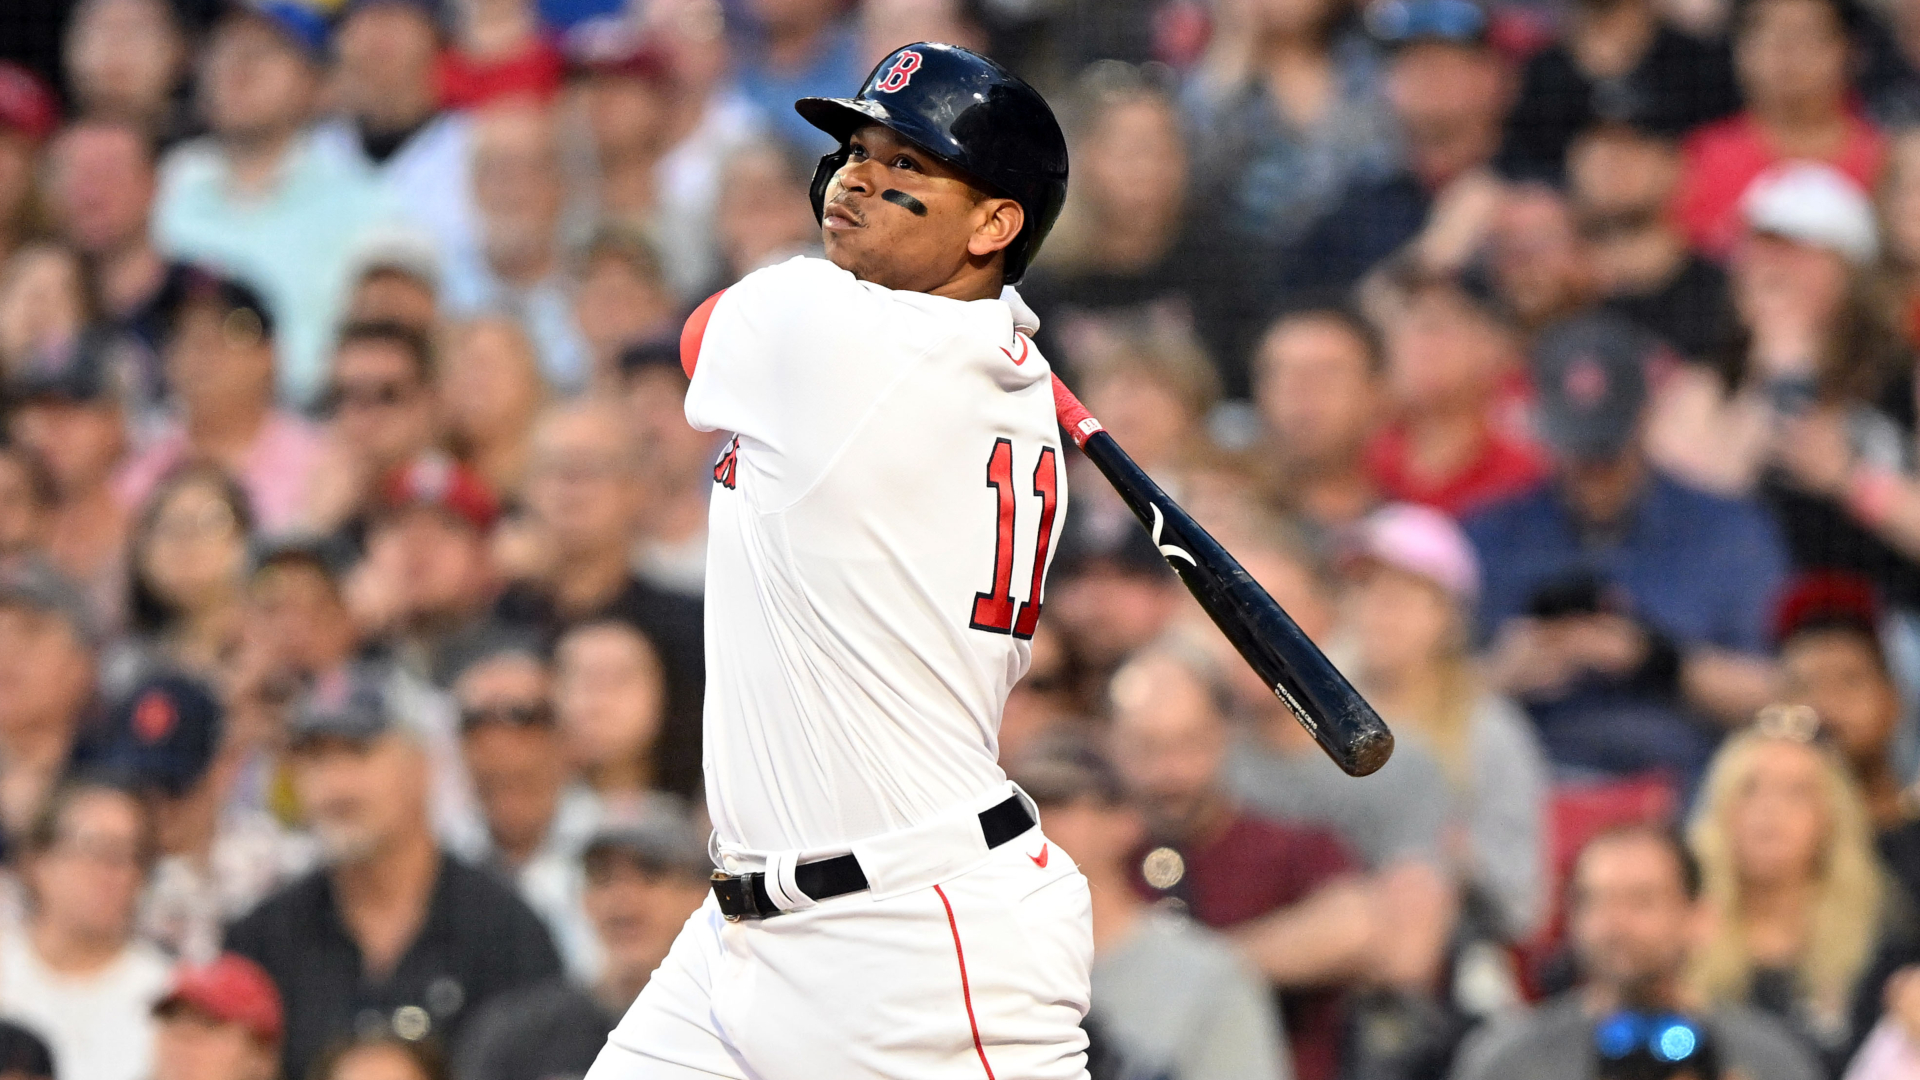 Frustration bubbling as Rafael Devers tries to chase his way out of a slump  - The Boston Globe